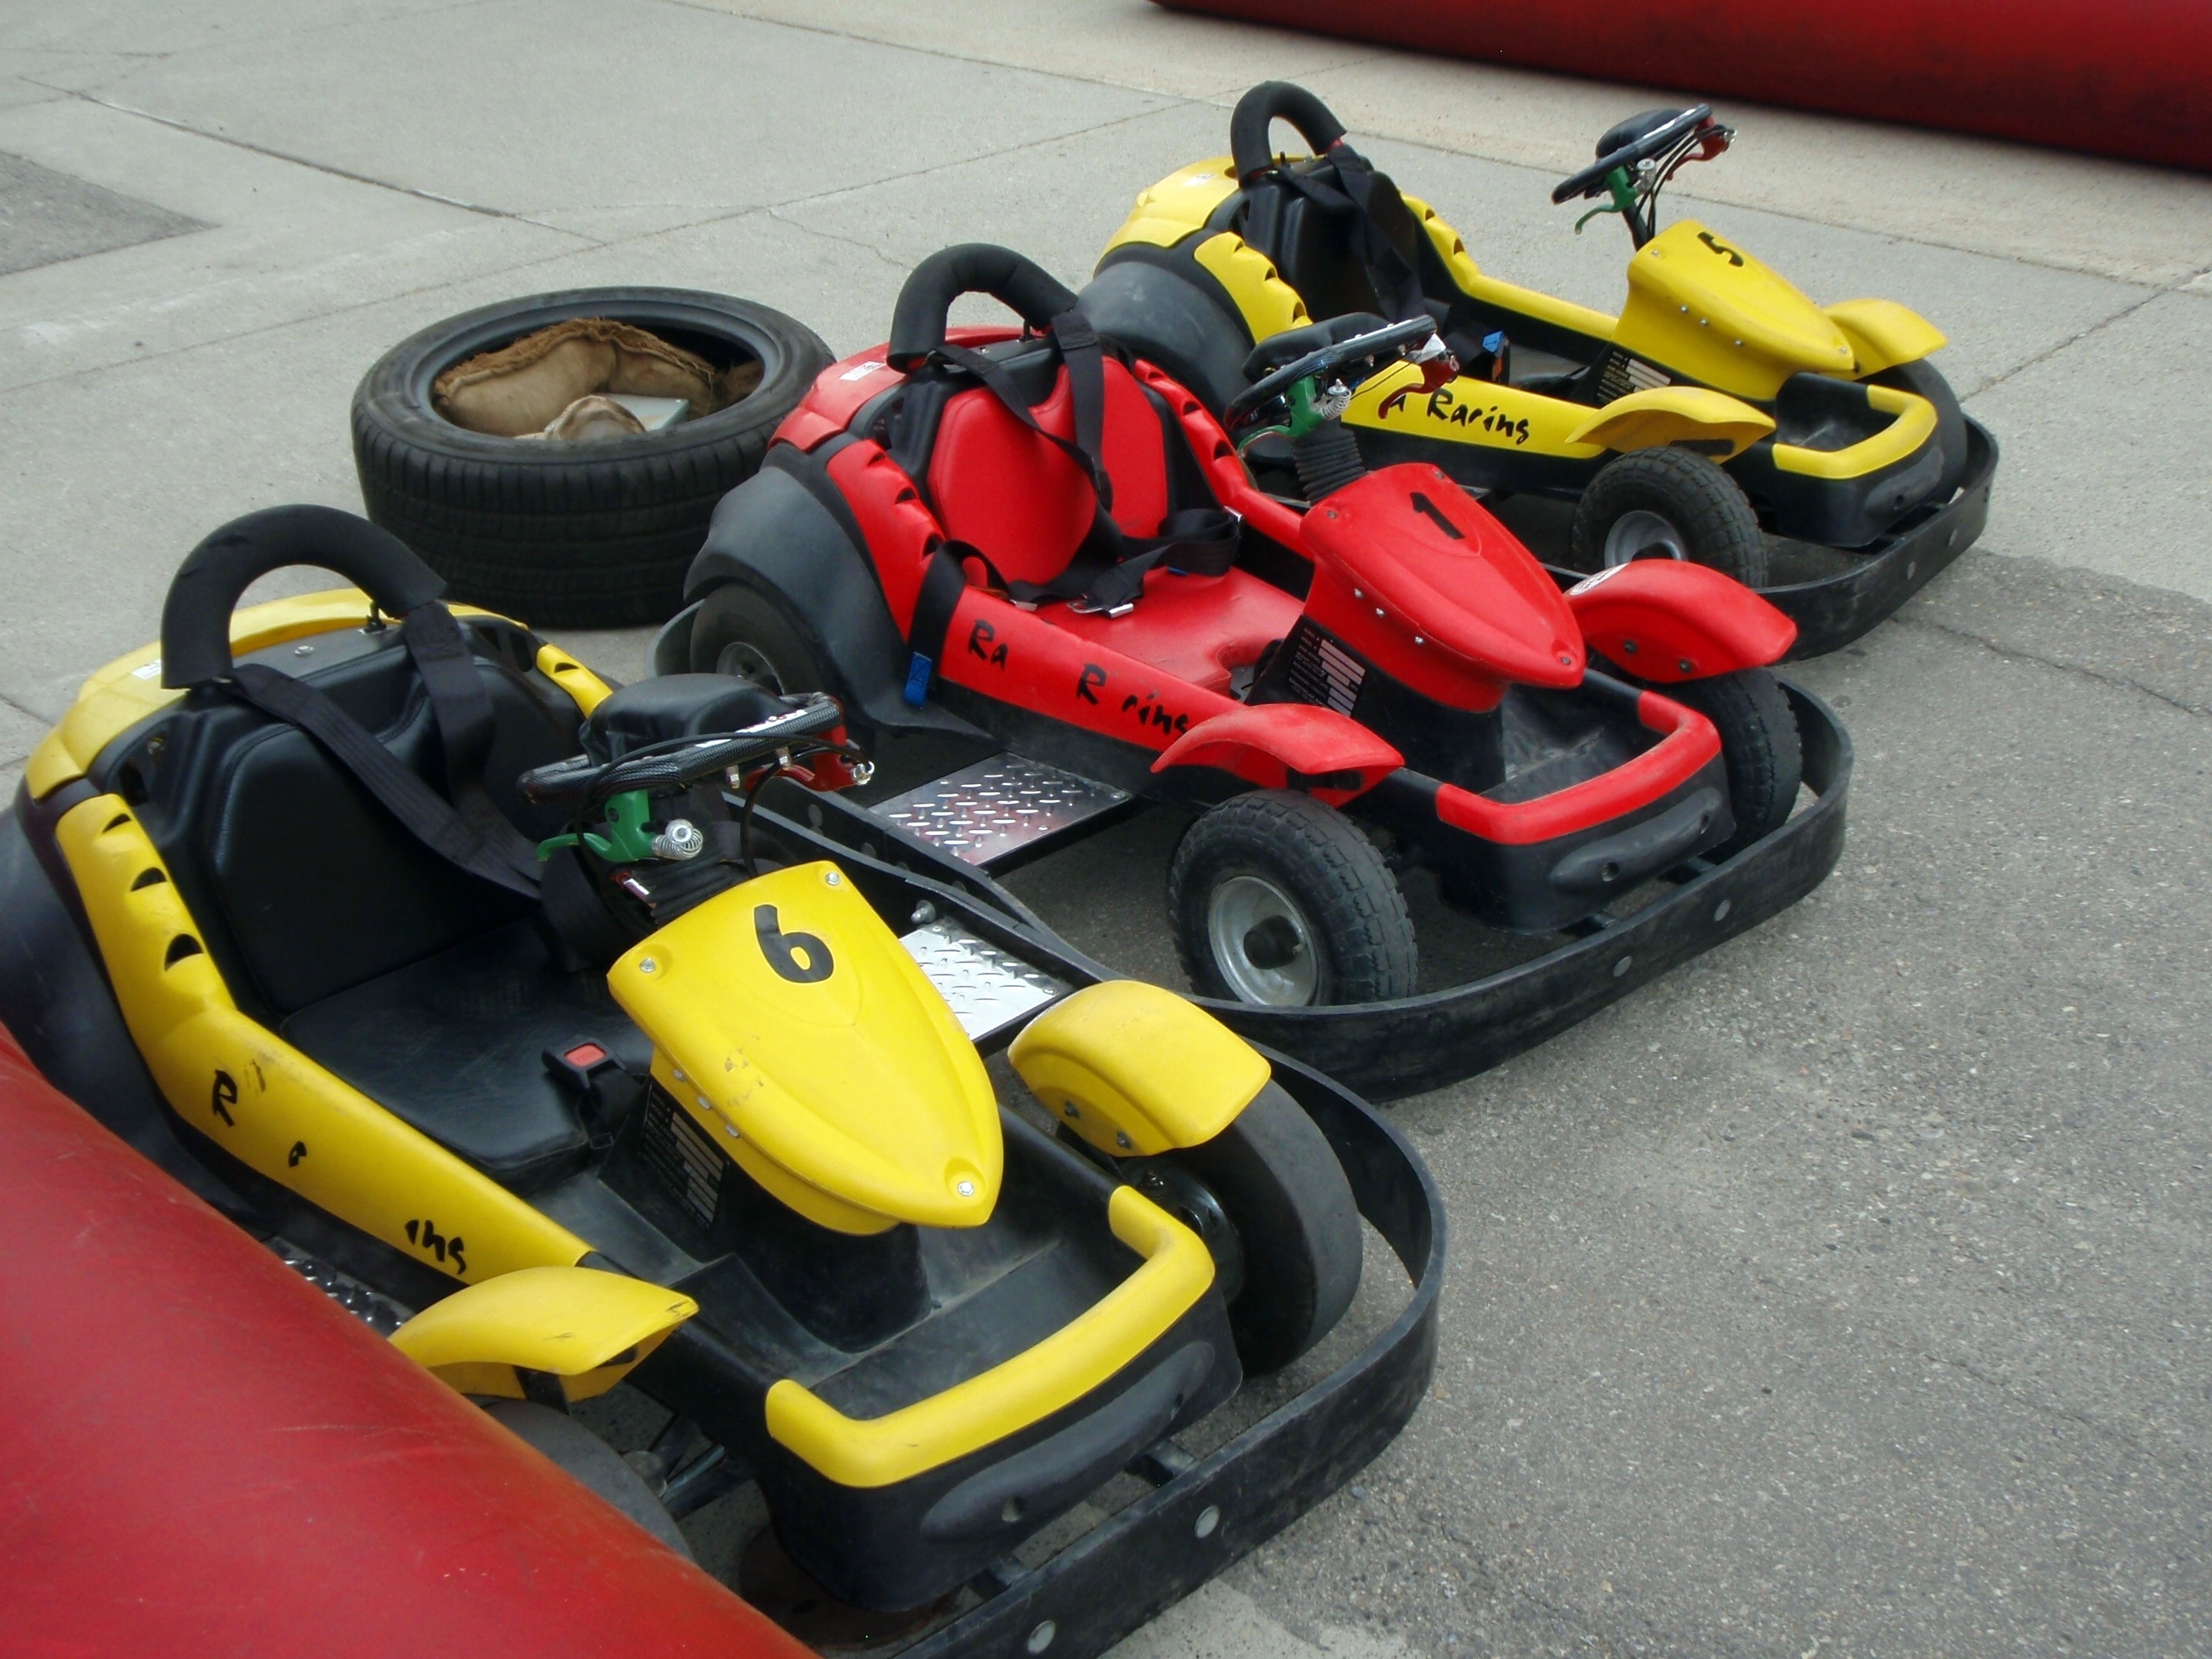 "The Day I First Rode a Go-Kart" - A past experience that ...